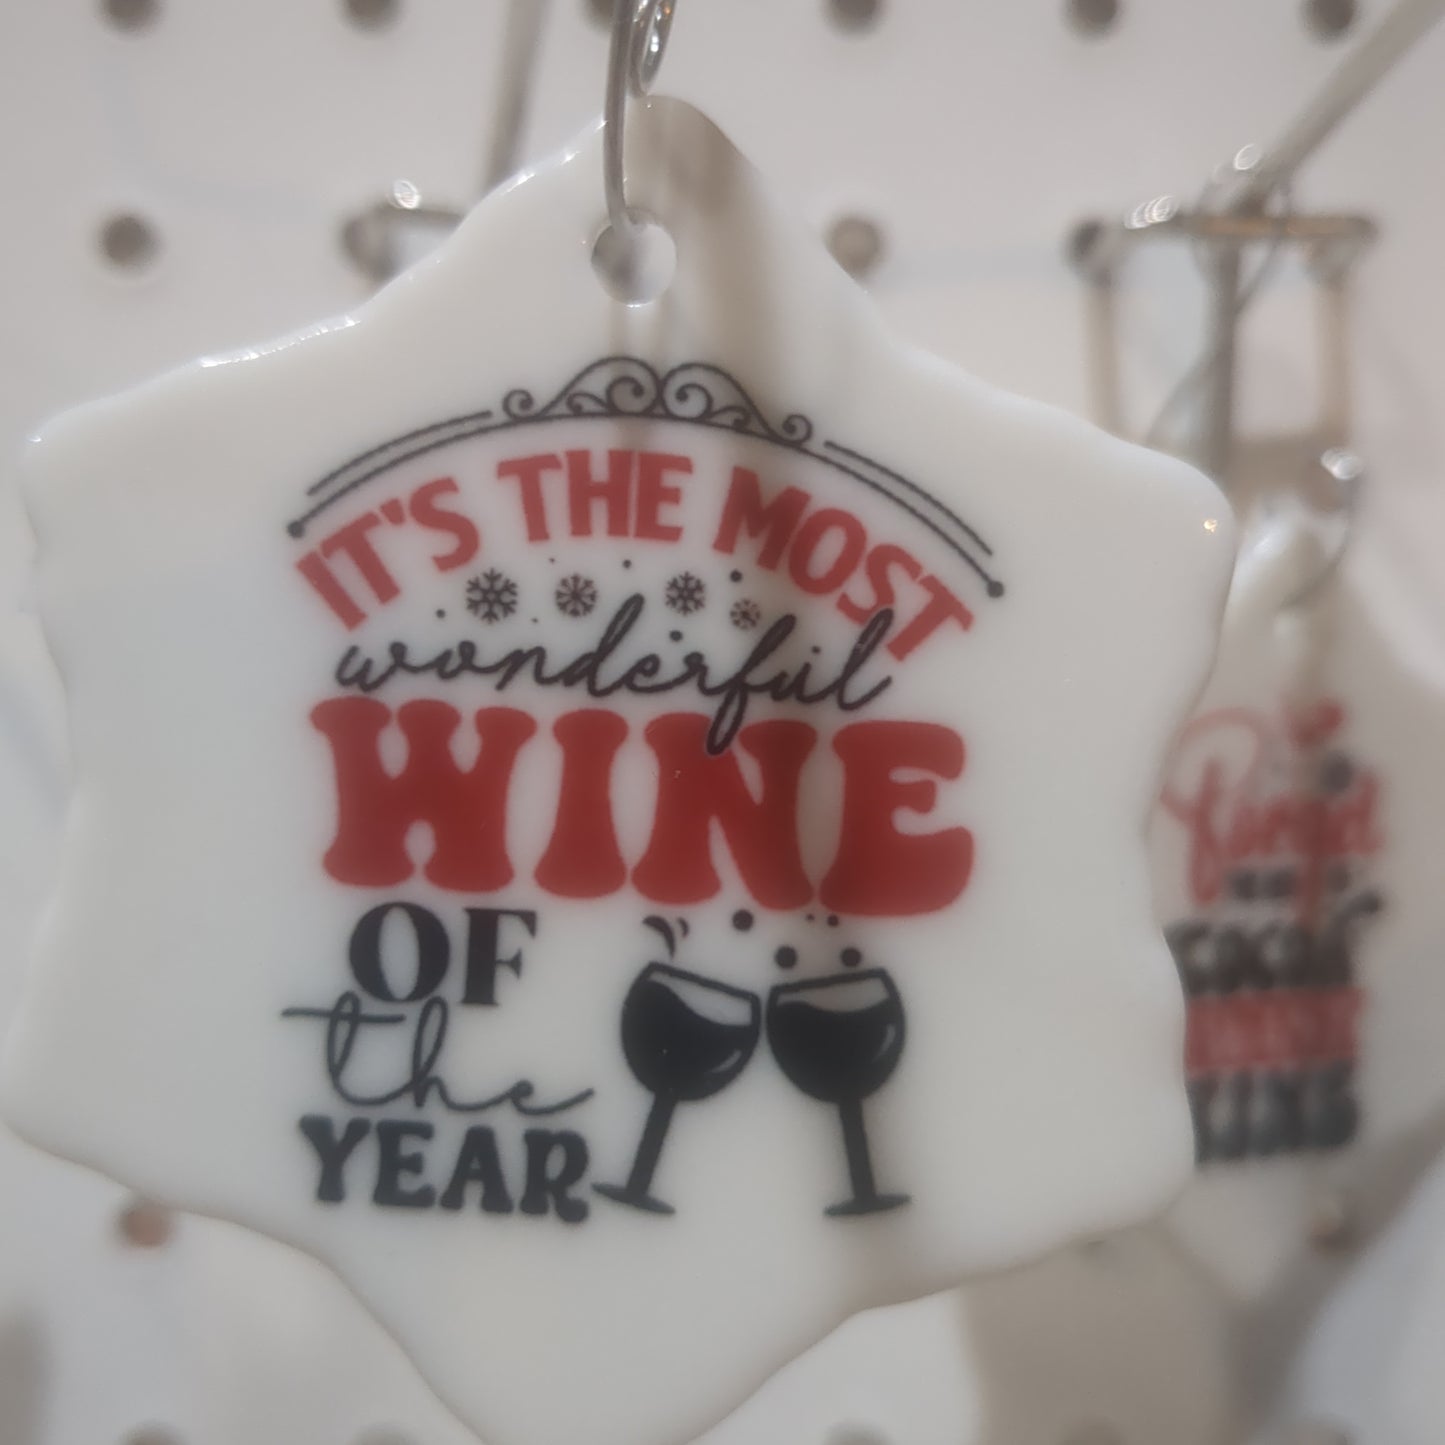 Ceramic wine ornament it's the most wonderful wine of the year